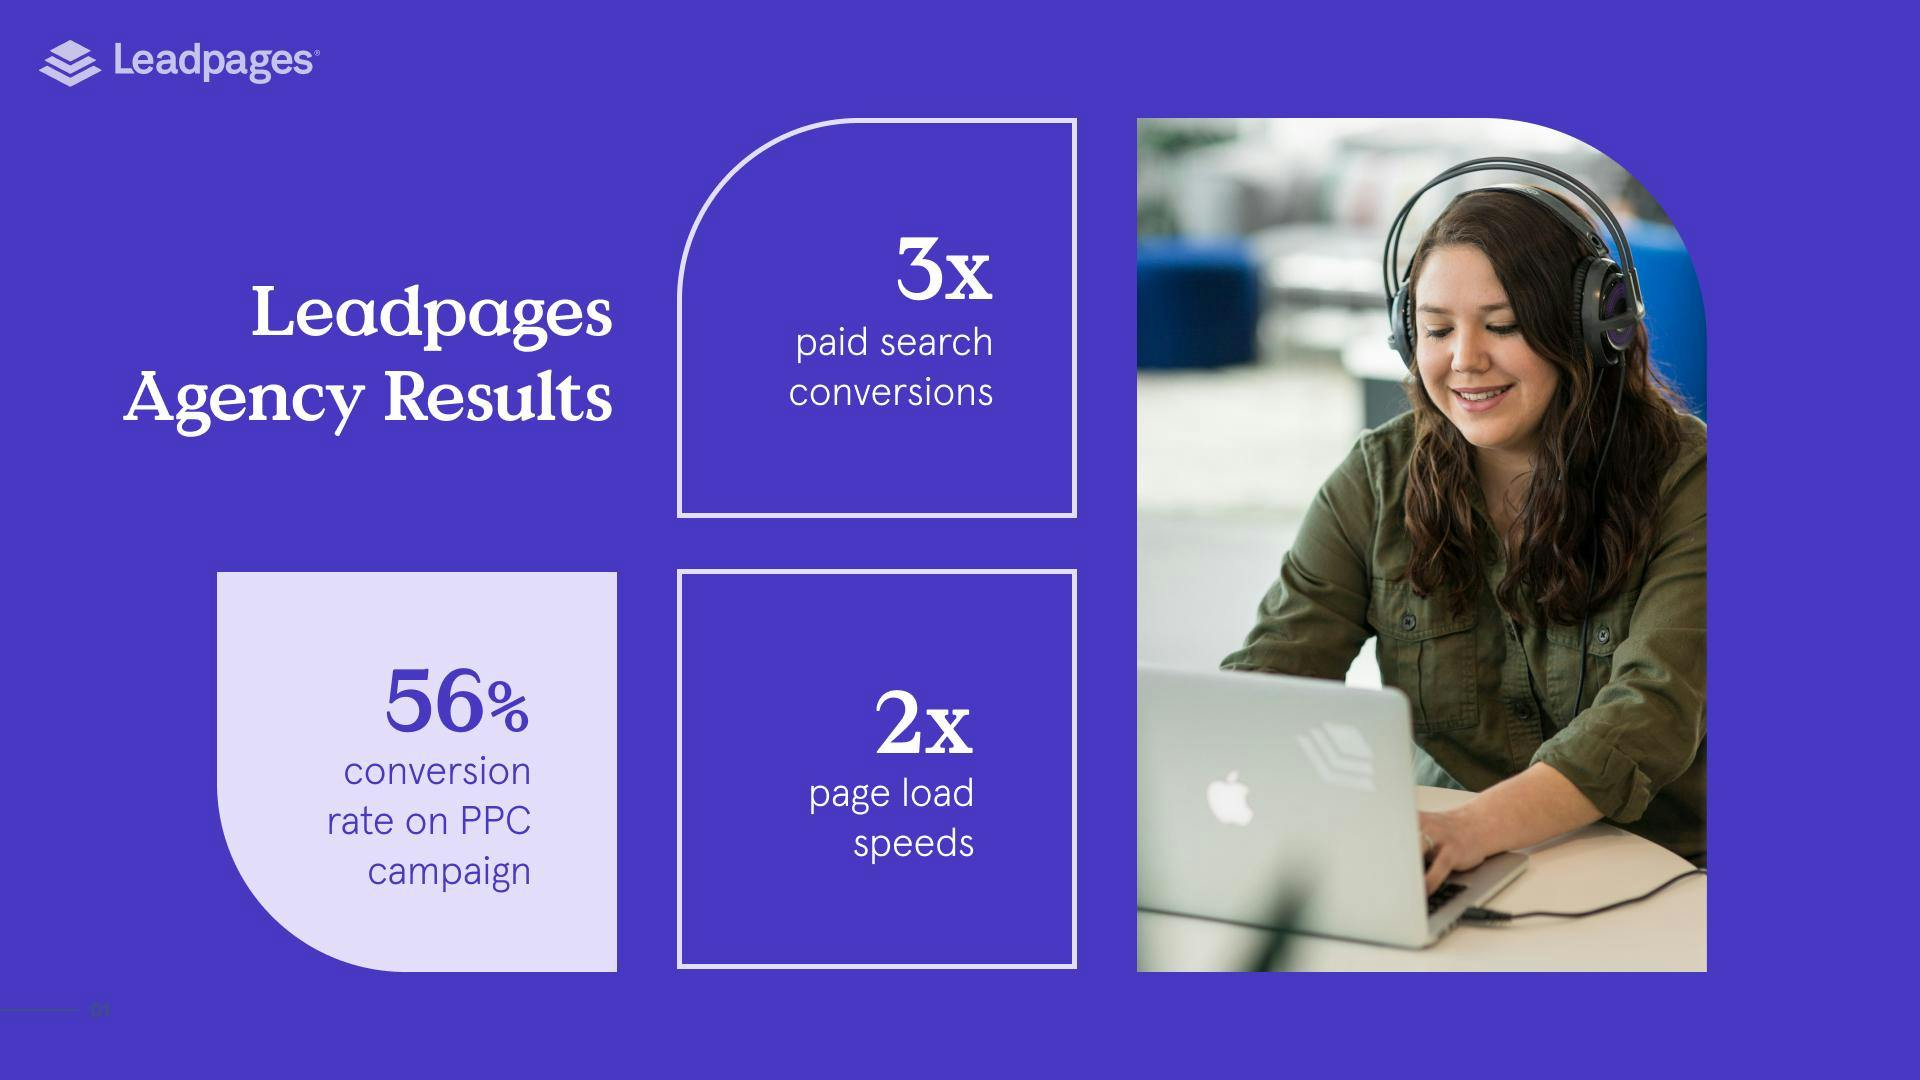 Leadpages agency results